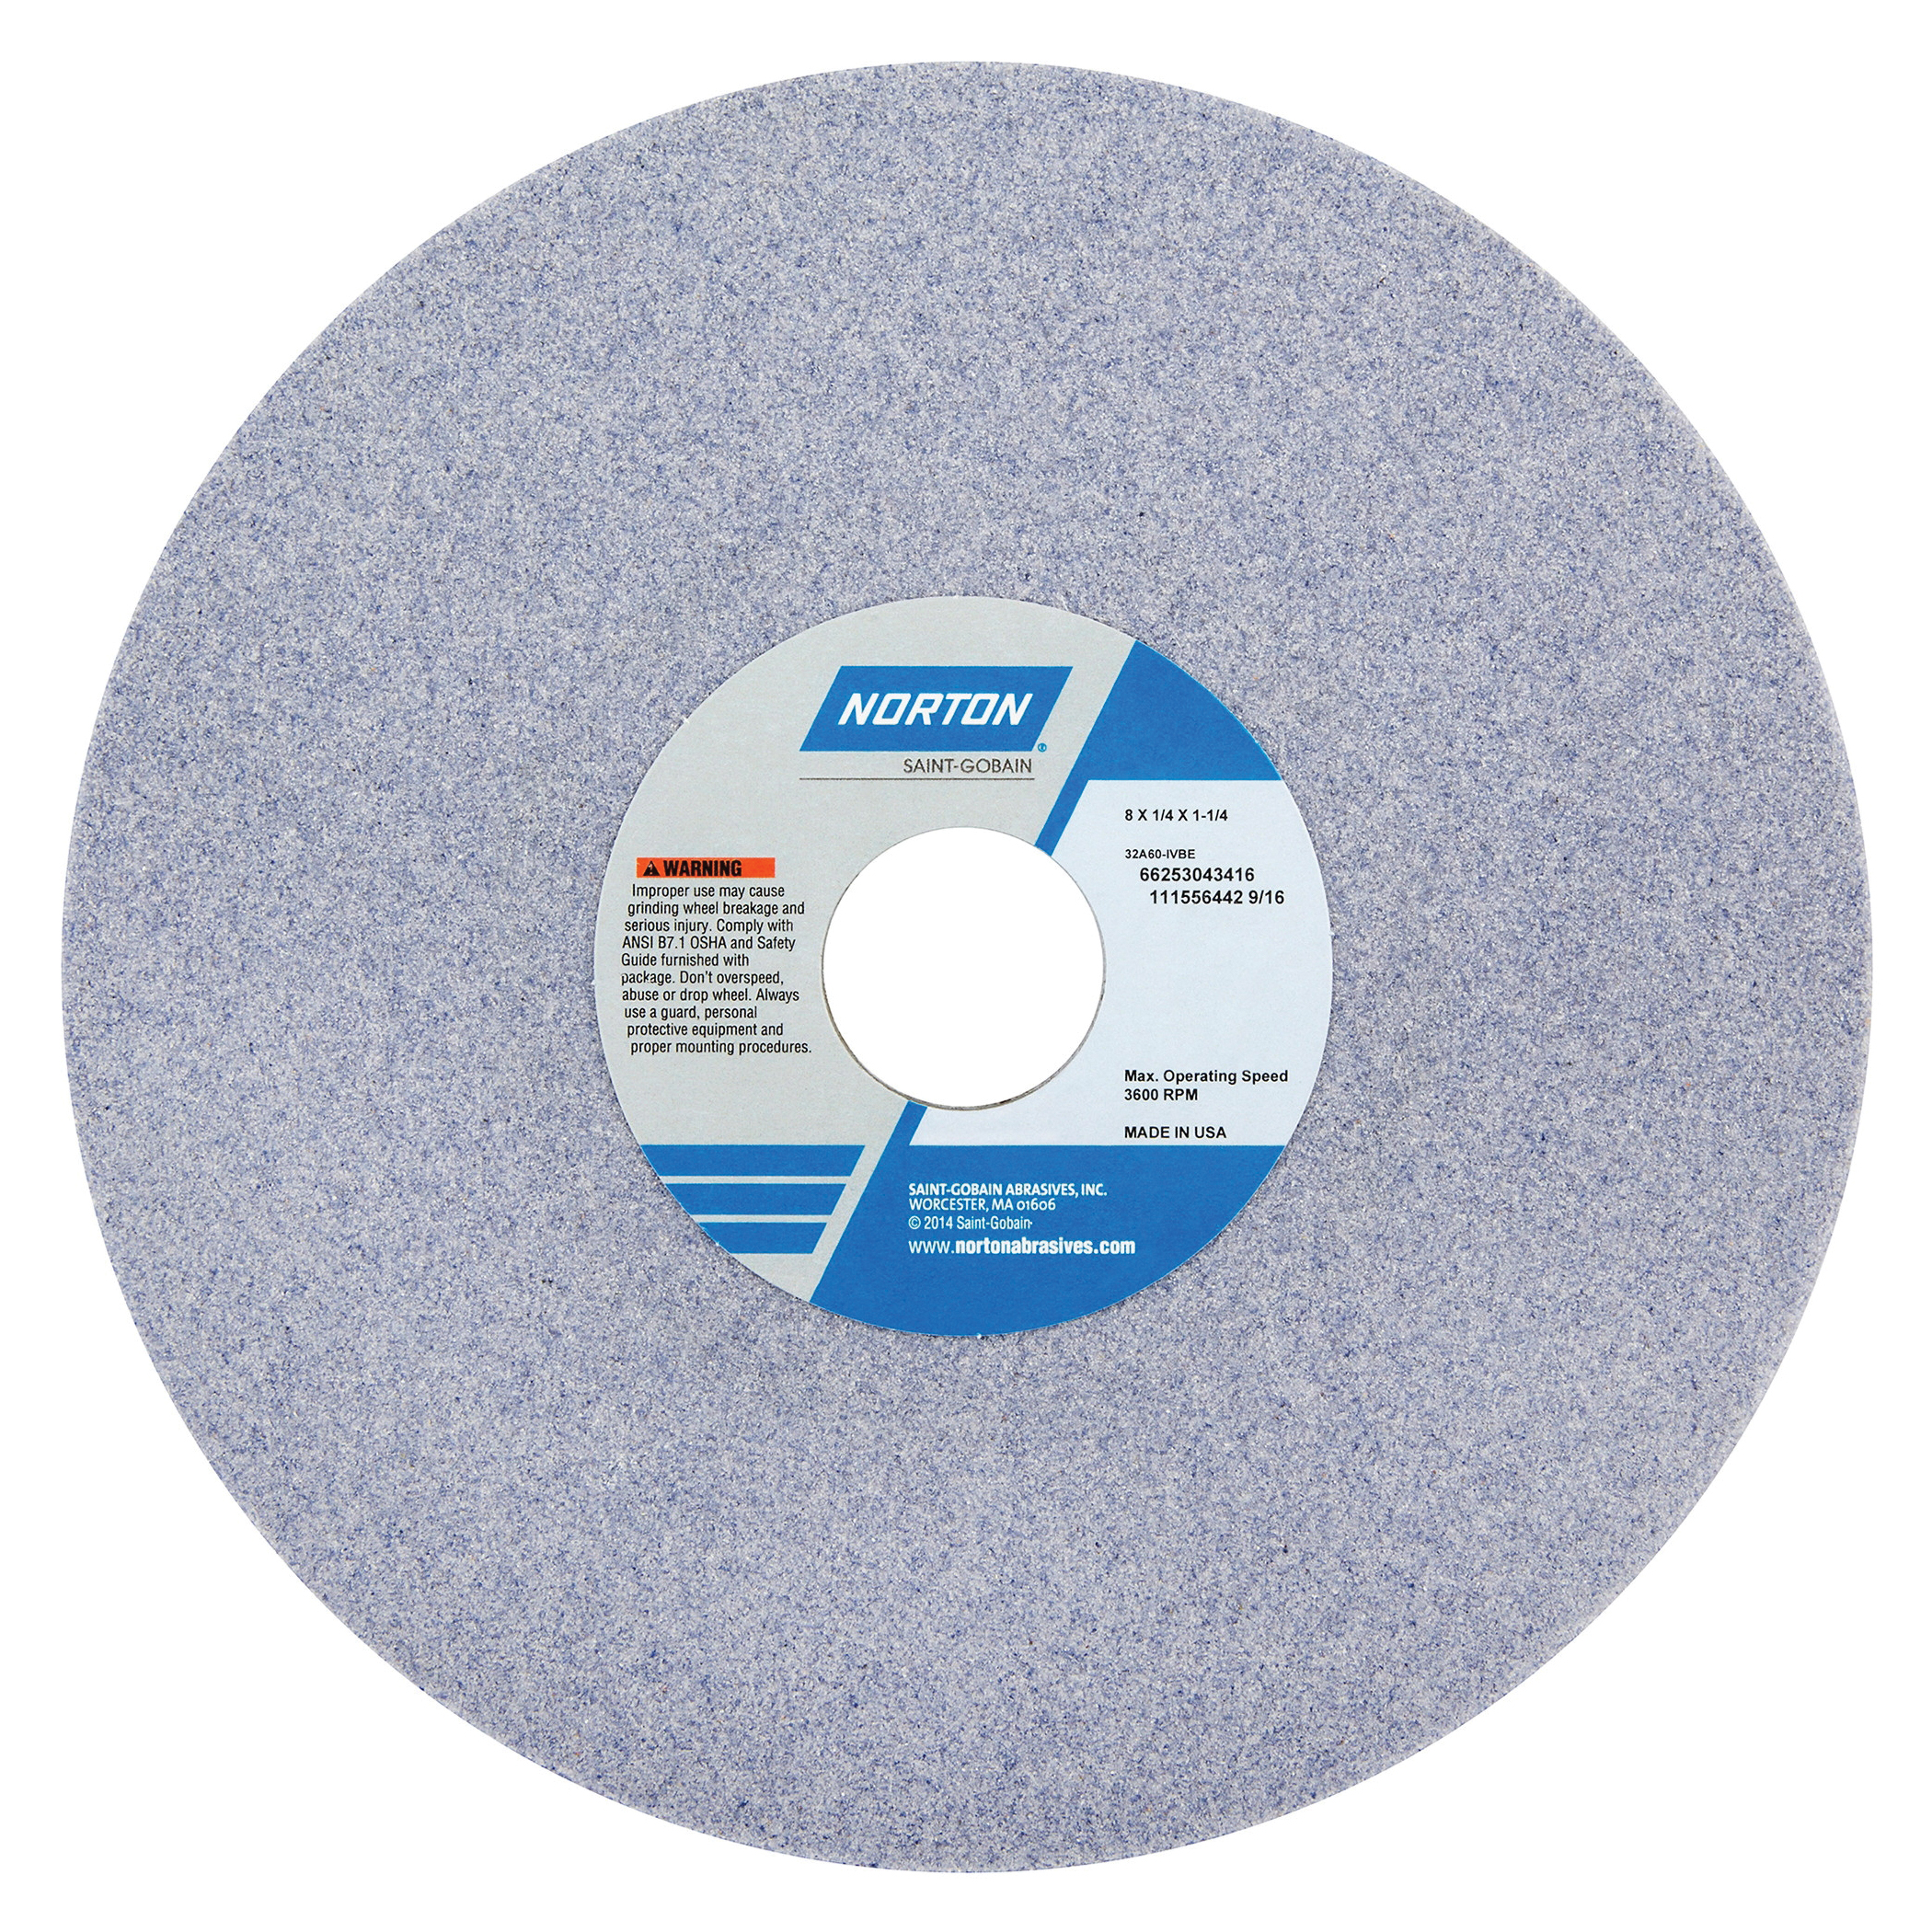 Norton® 66253043310 32A Straight Toolroom Wheel, 8 in Dia x 1/4 in THK, 1-1/4 in Center Hole, 46 Grit, Aluminum Oxide Abrasive